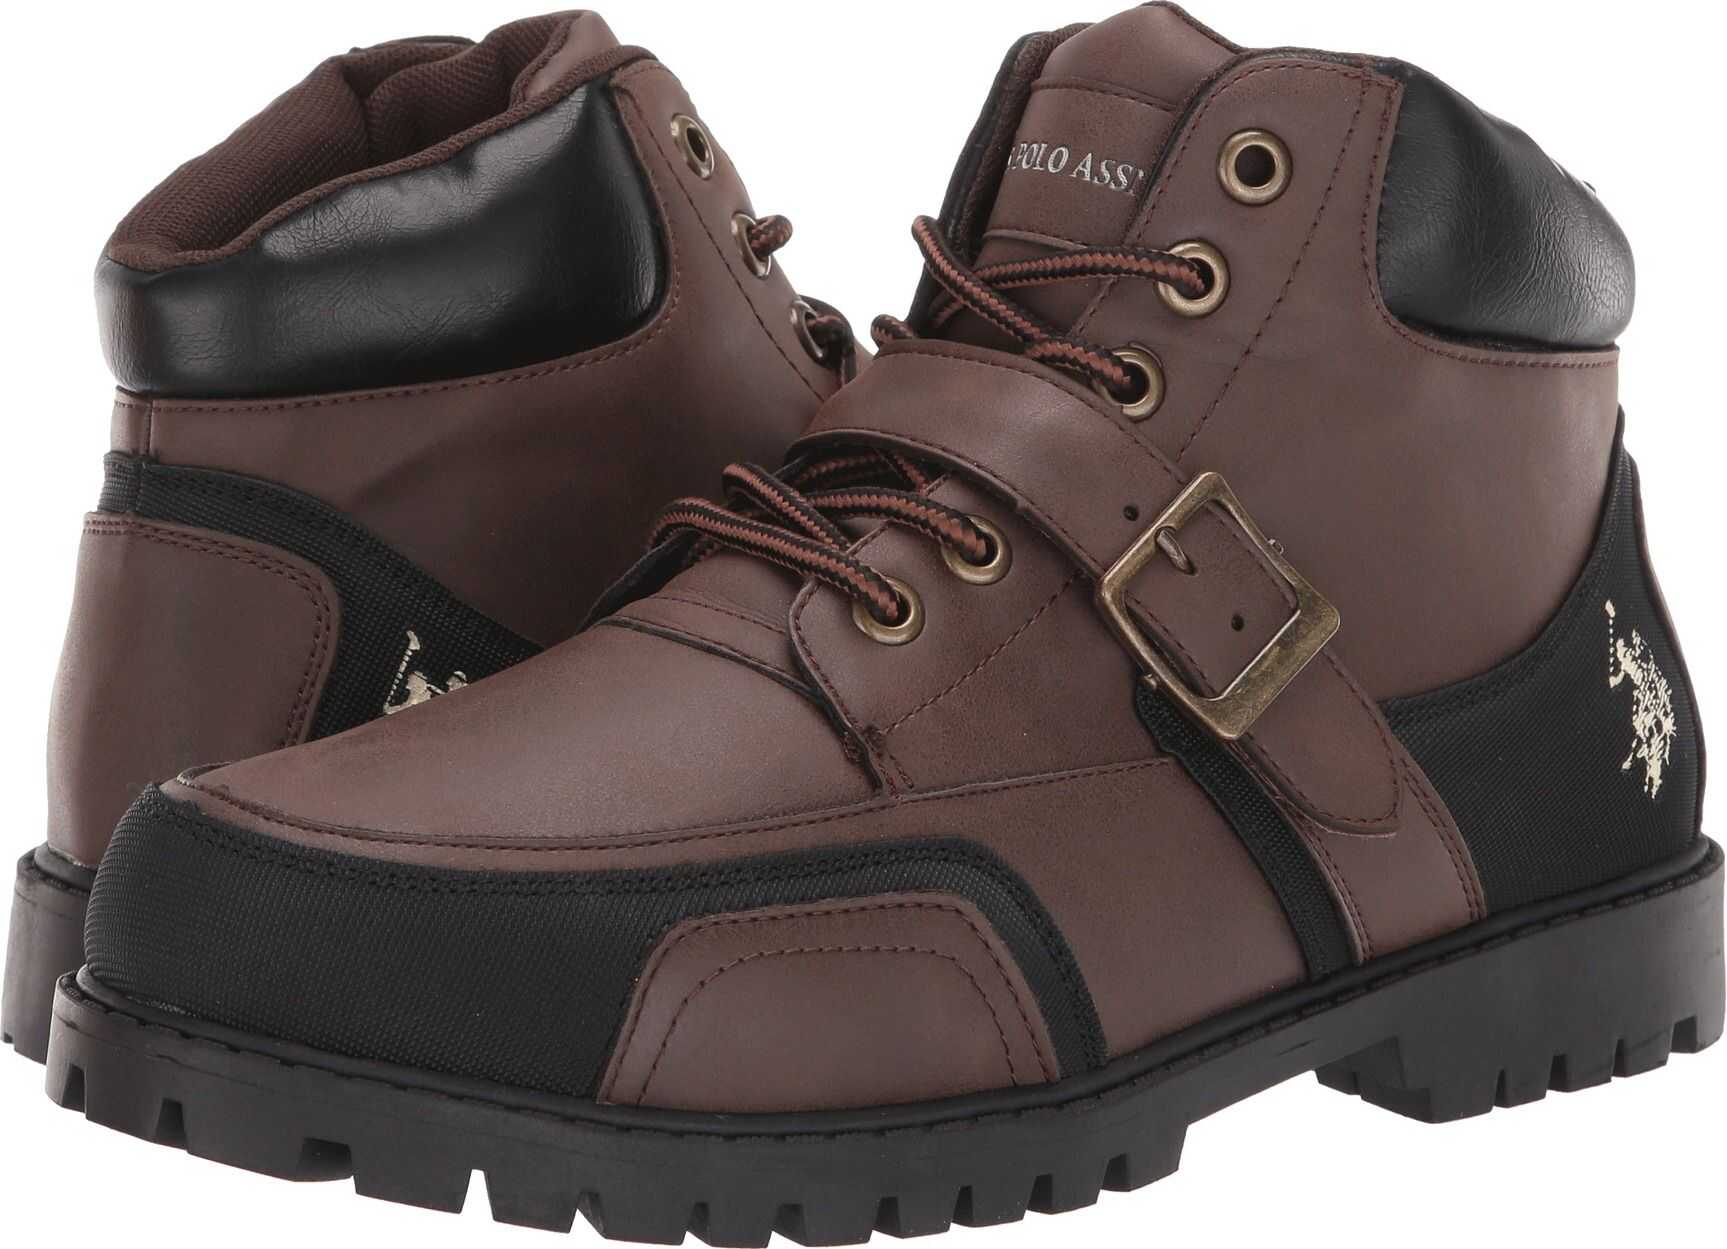 Bocanc U.S. POLO ASSN. Andes-Pmn Red/Brown/Brown Combo